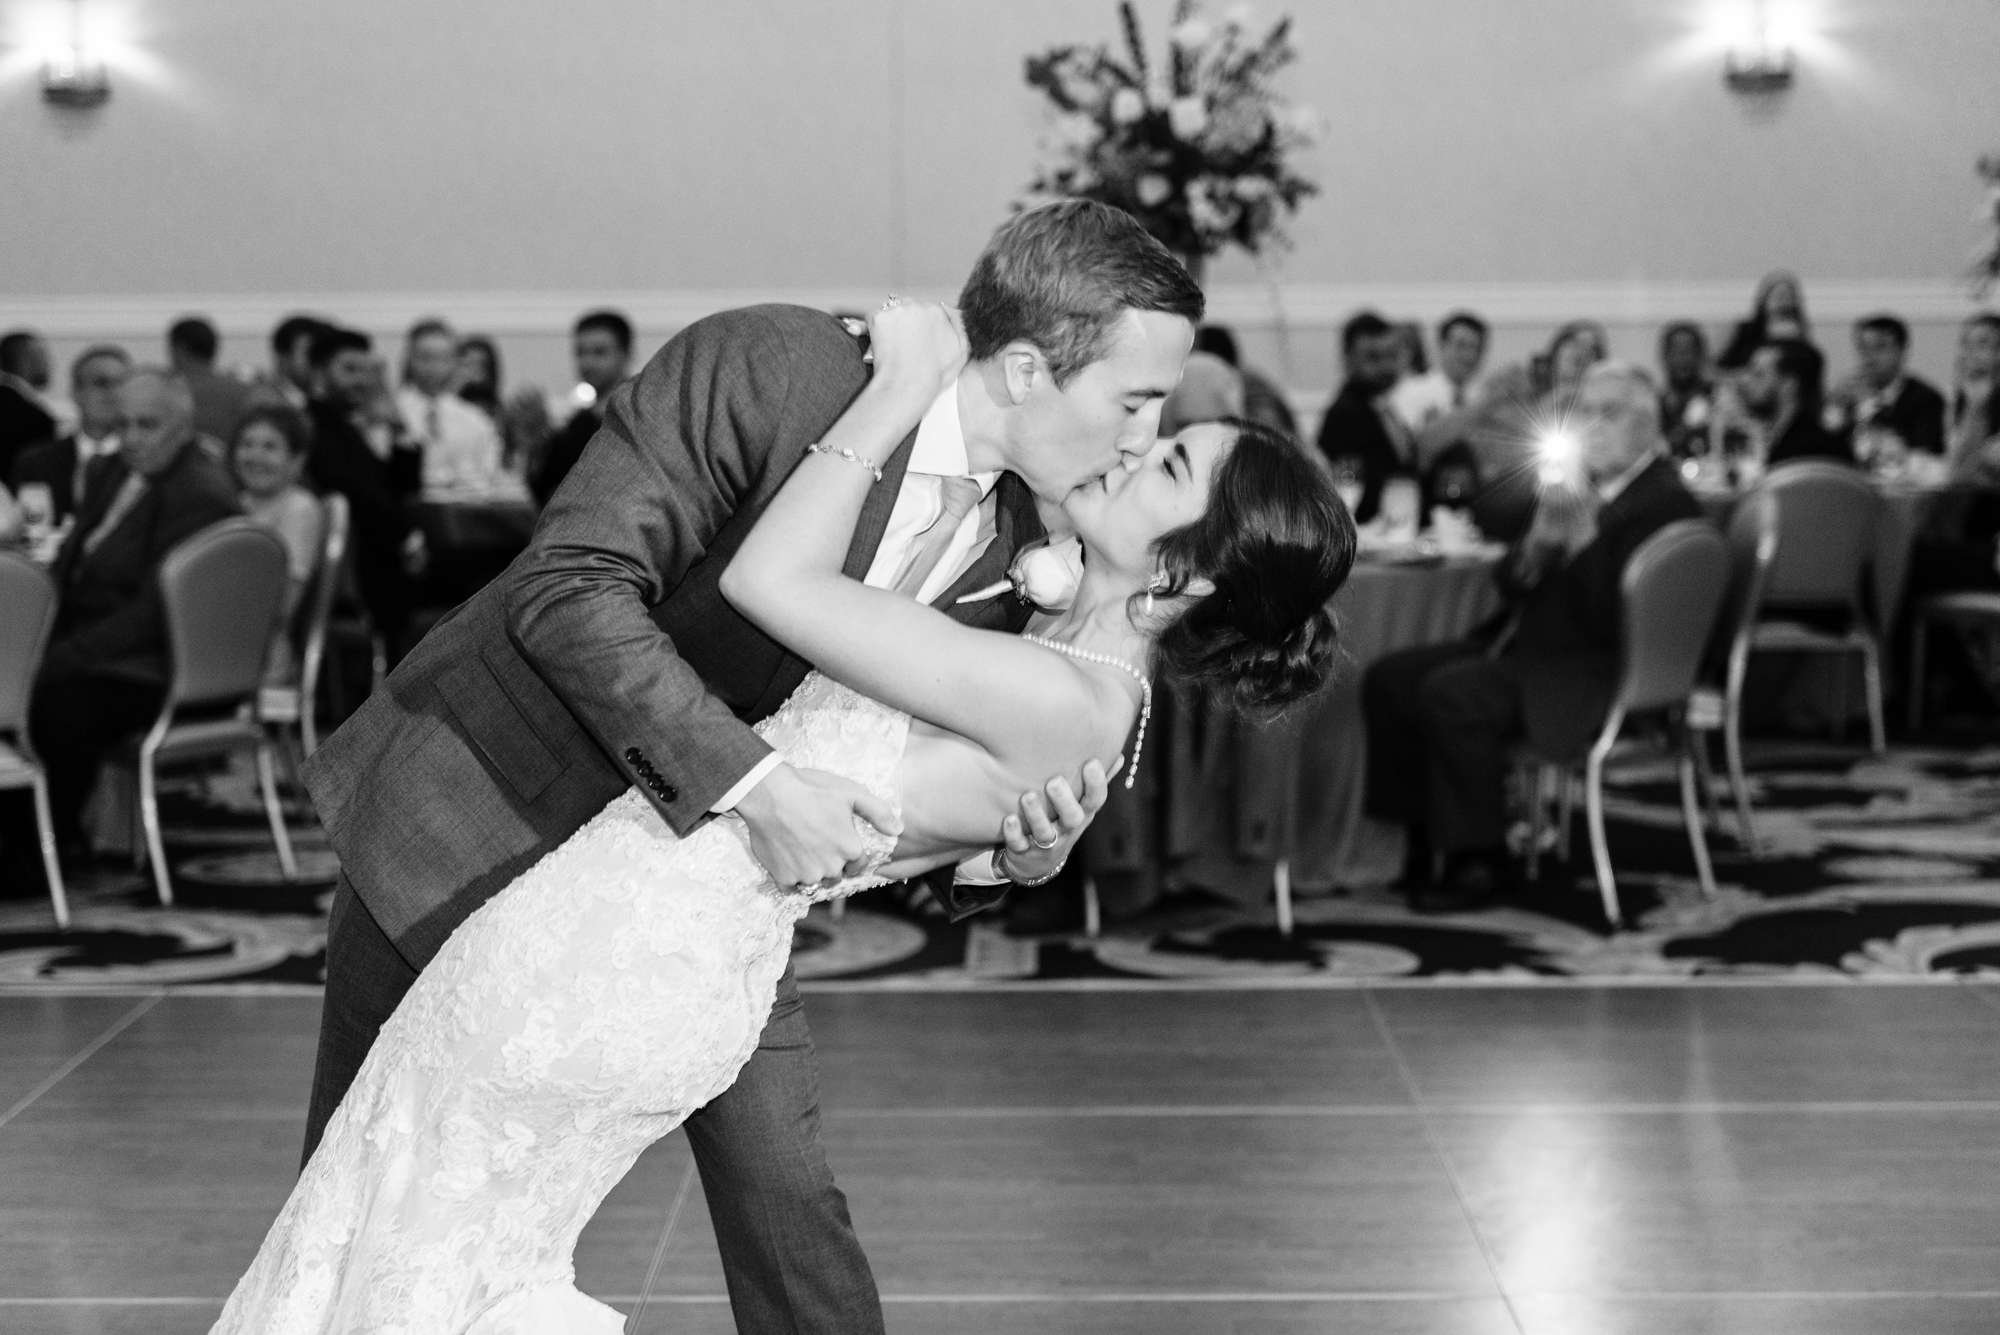 Bride & Groom’s first dance at a Wedding Reception at Morris Inn of Venue ND